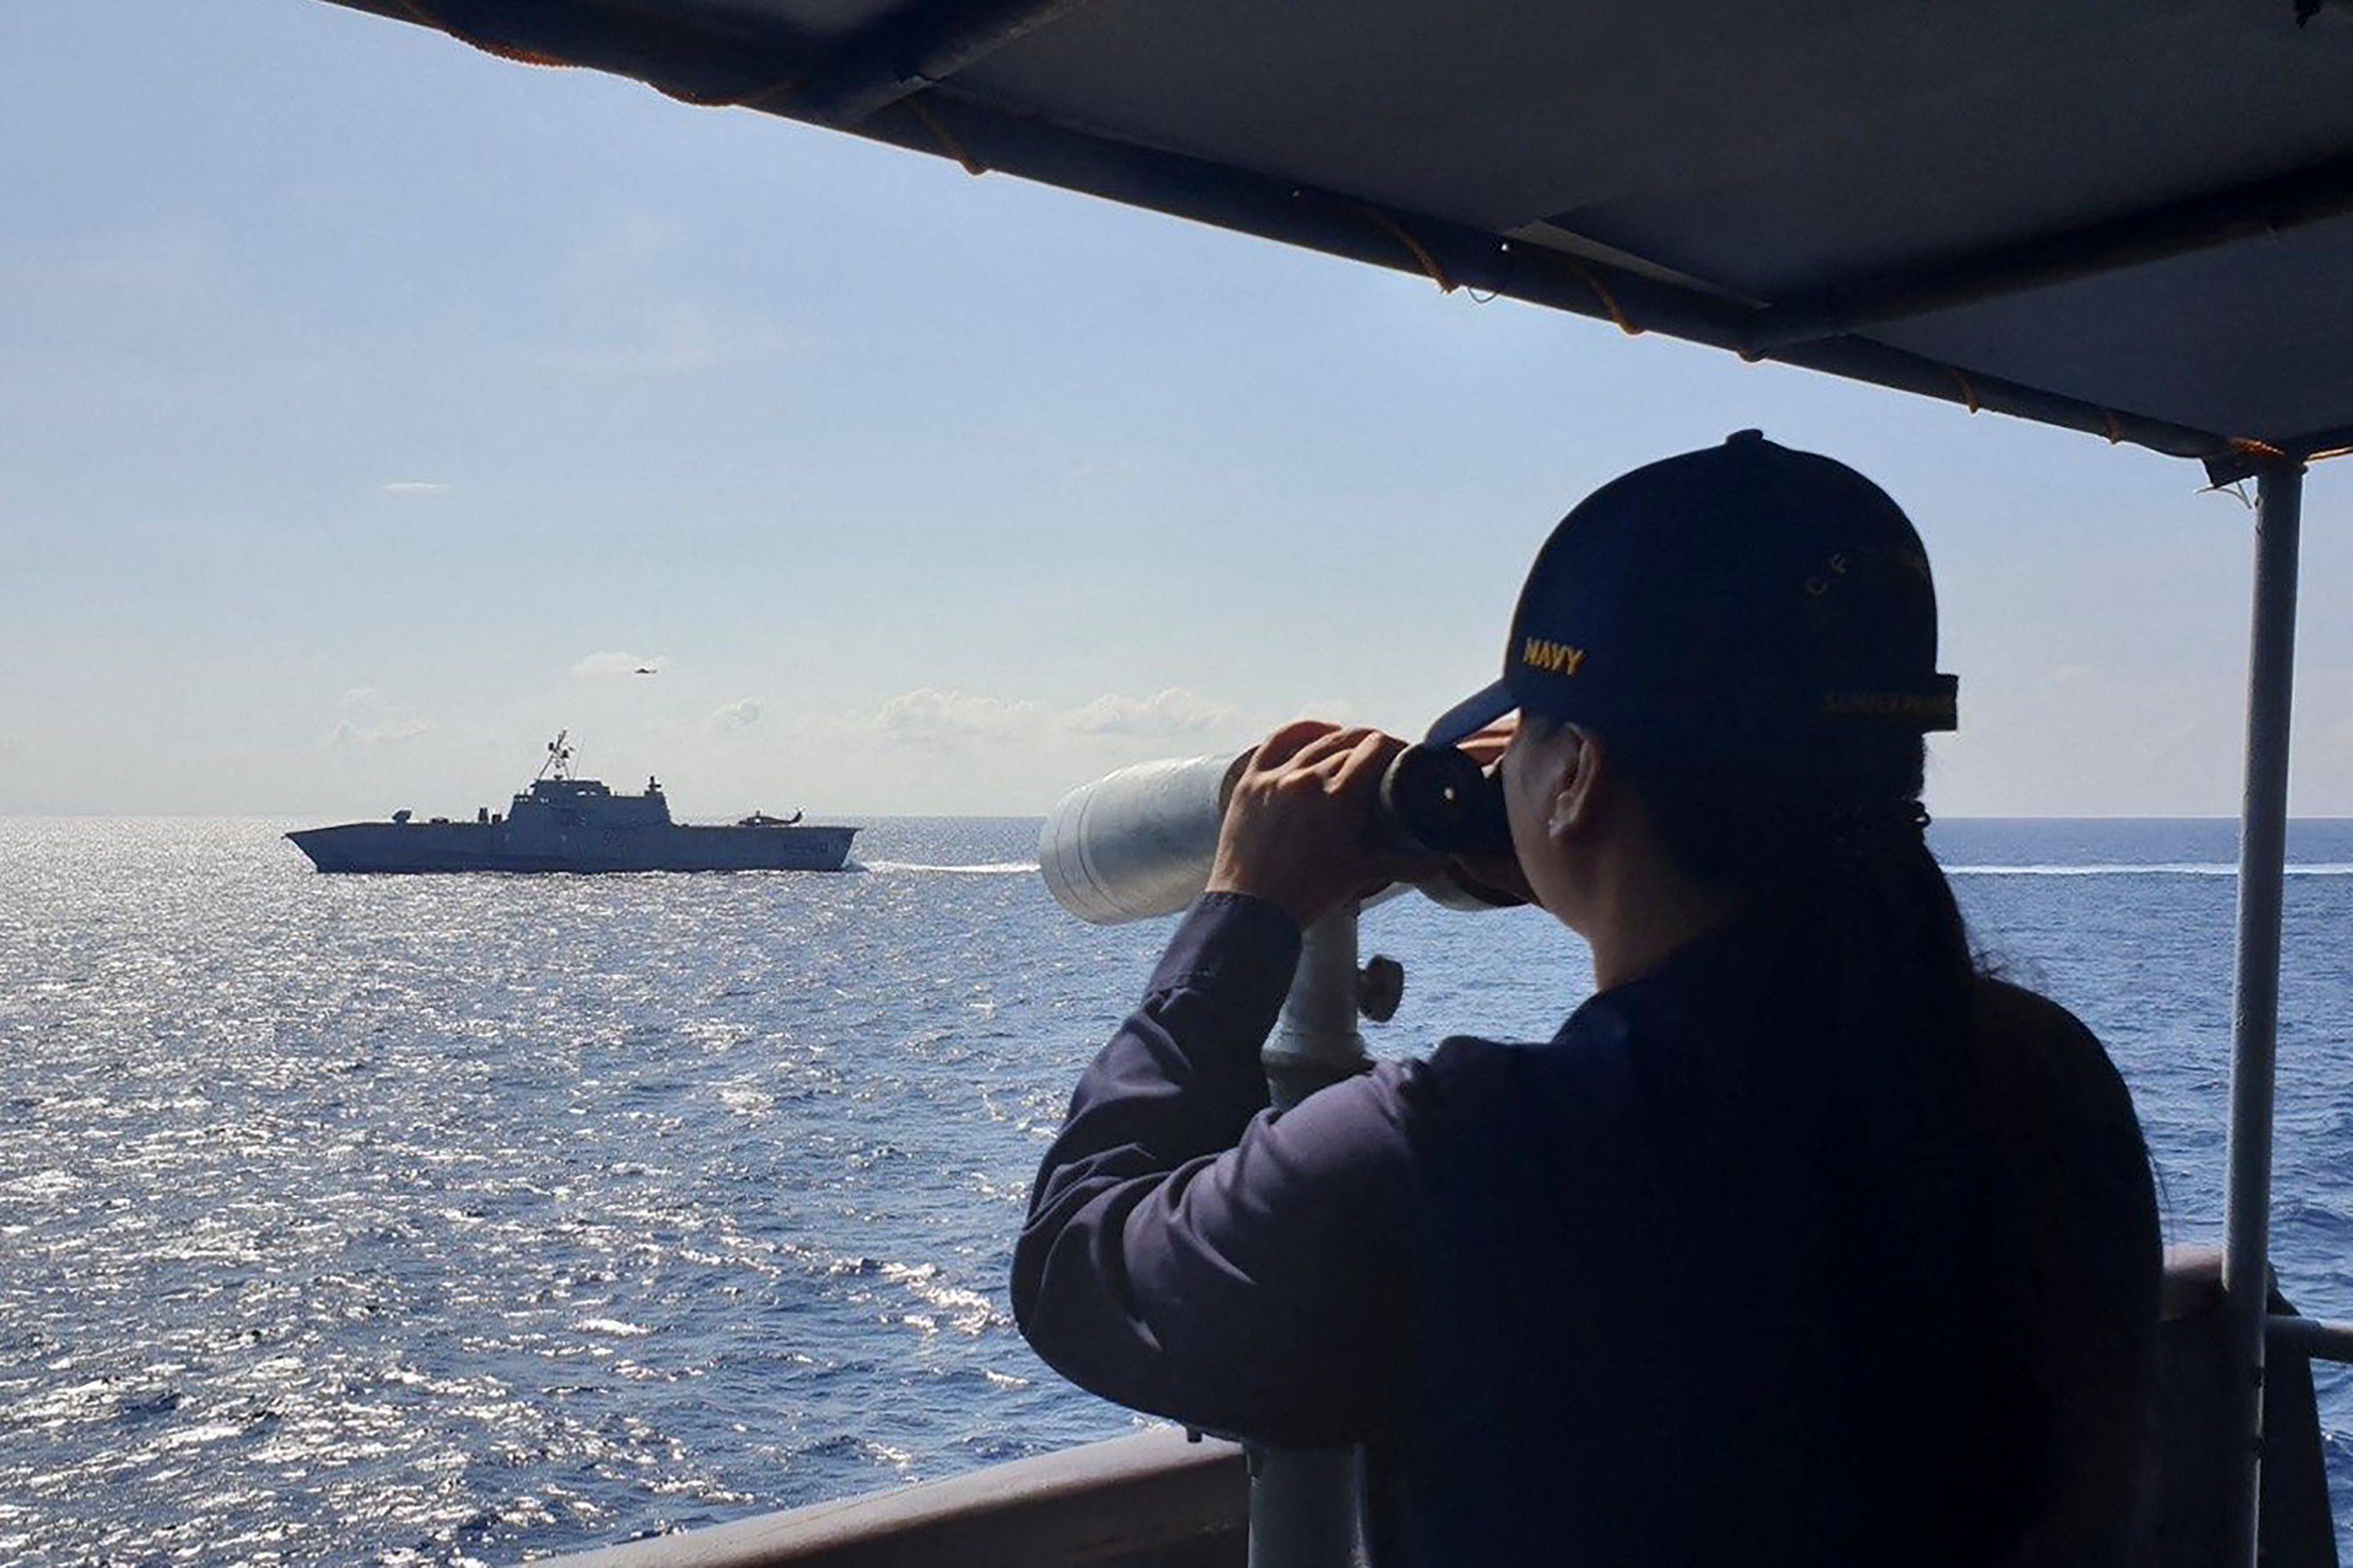 A service member from the Philippine Navy keeps watch as a US littoral combat ship sails past during a joint “maritime cooperative activity” in the South China Sea on February 9. Photo: Armed Forces of the Philippines’ Western Command / Handout via AFP